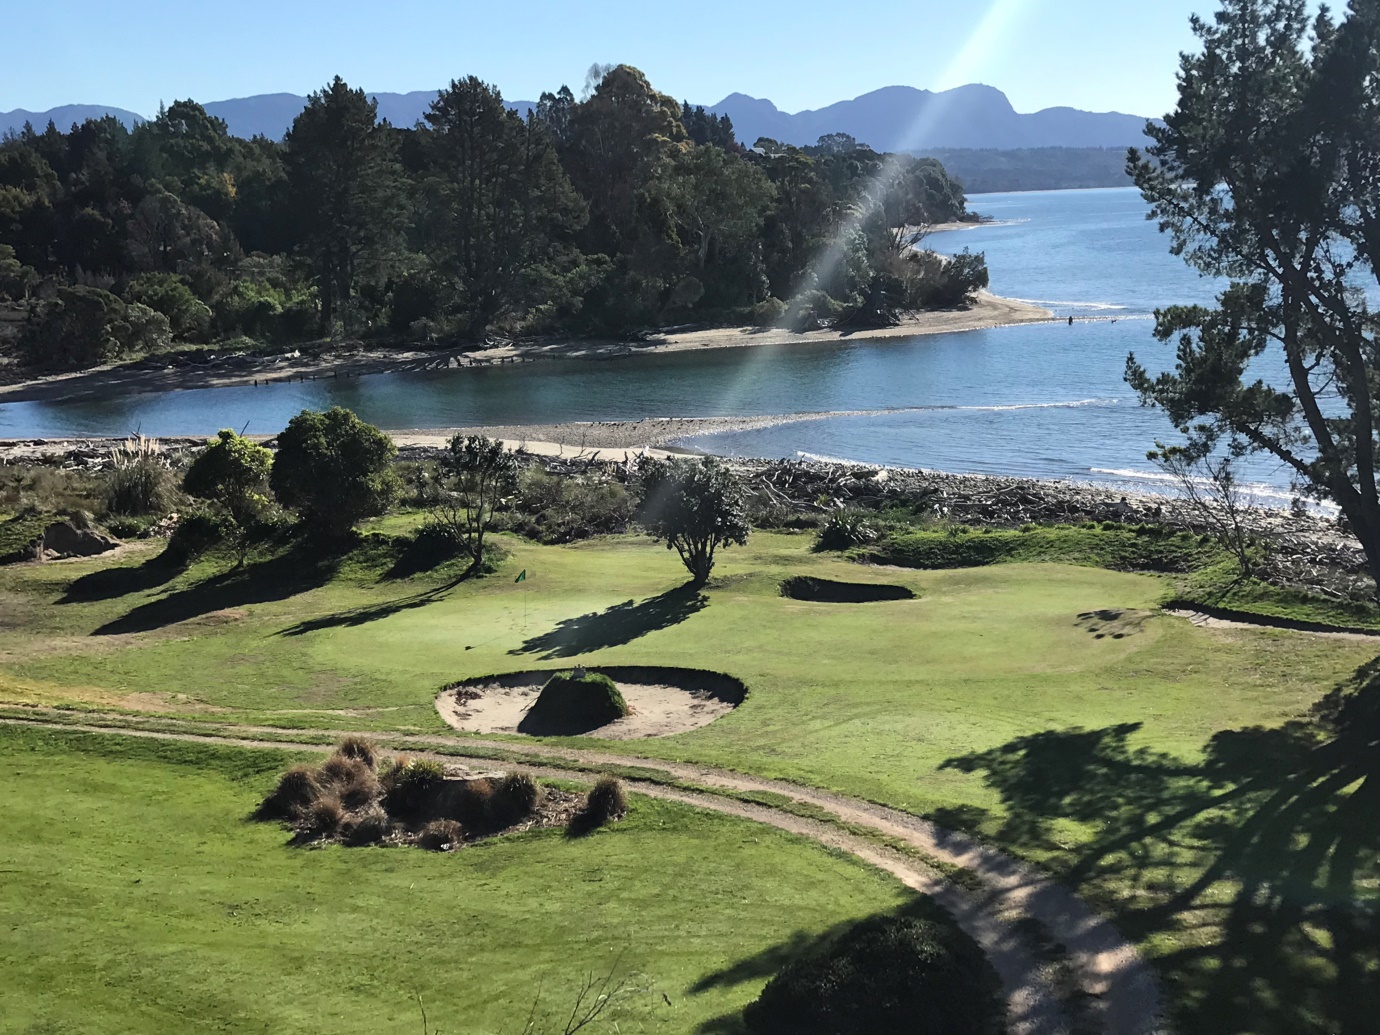 The 12th green – surrounded by 5 bunkers and ocean behind